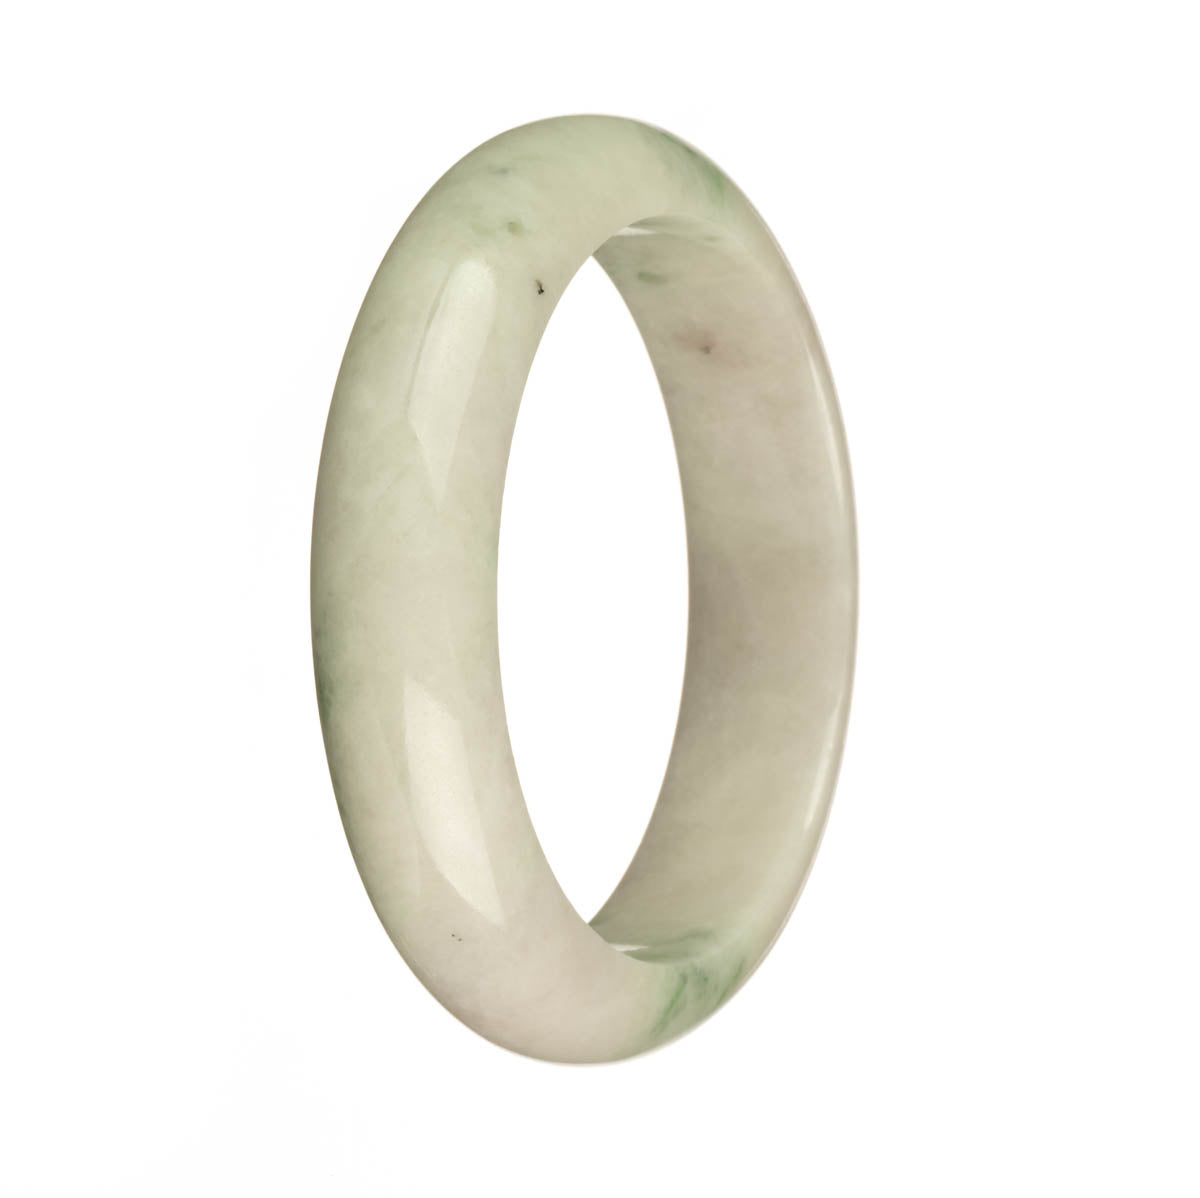 A beautiful jadeite jade bangle with a mix of white, apple green, and dark green spots, shaped in a 59mm half moon design. Perfect for adding a touch of elegance to any outfit.